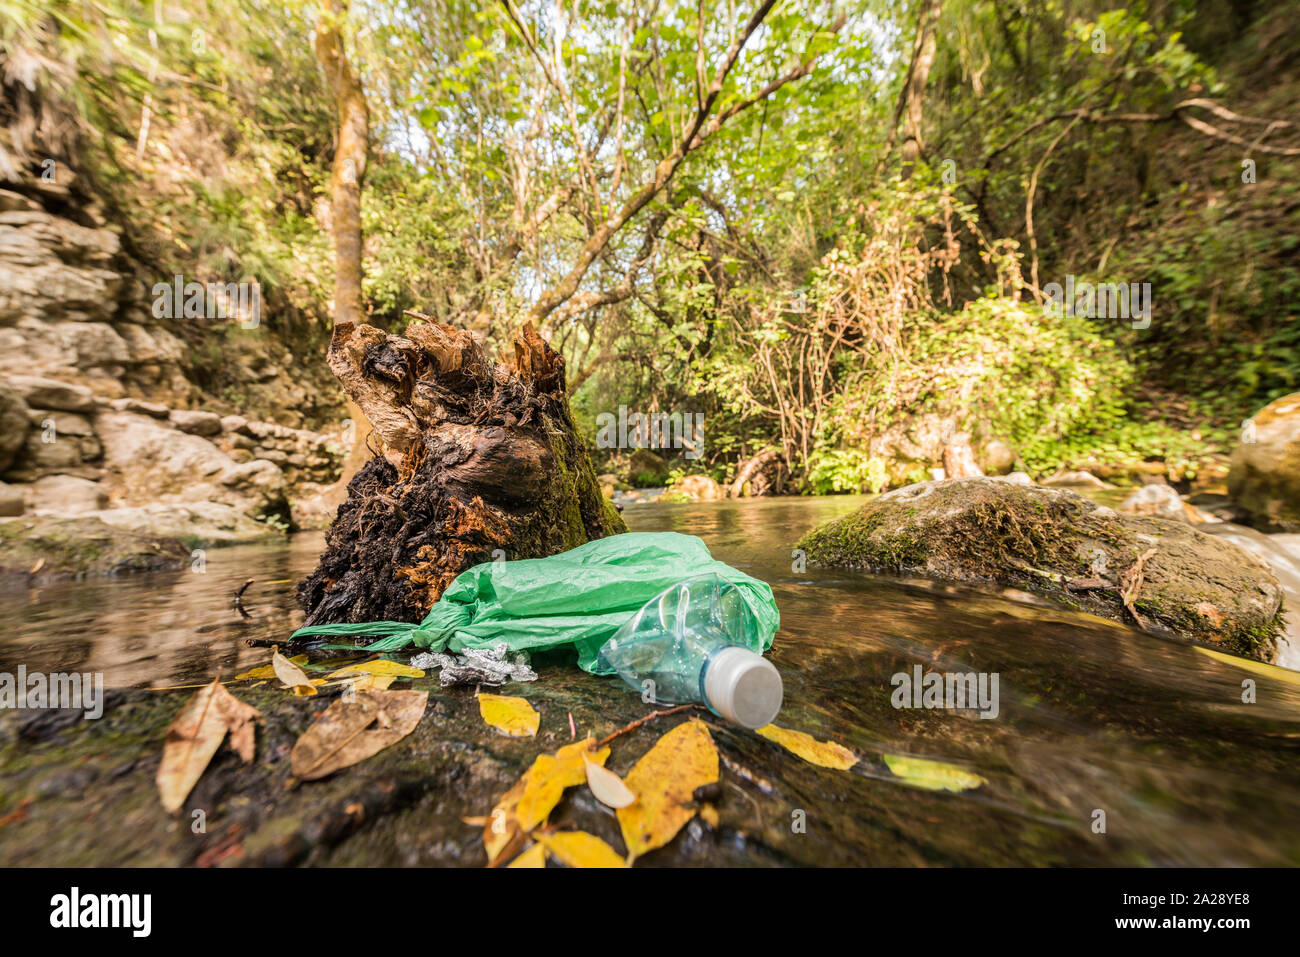 Garbage in an abandoned plastic bag on the bank of a river of clean water. Concepts of environmental damage and recycling of plastic containers. Stock Photo